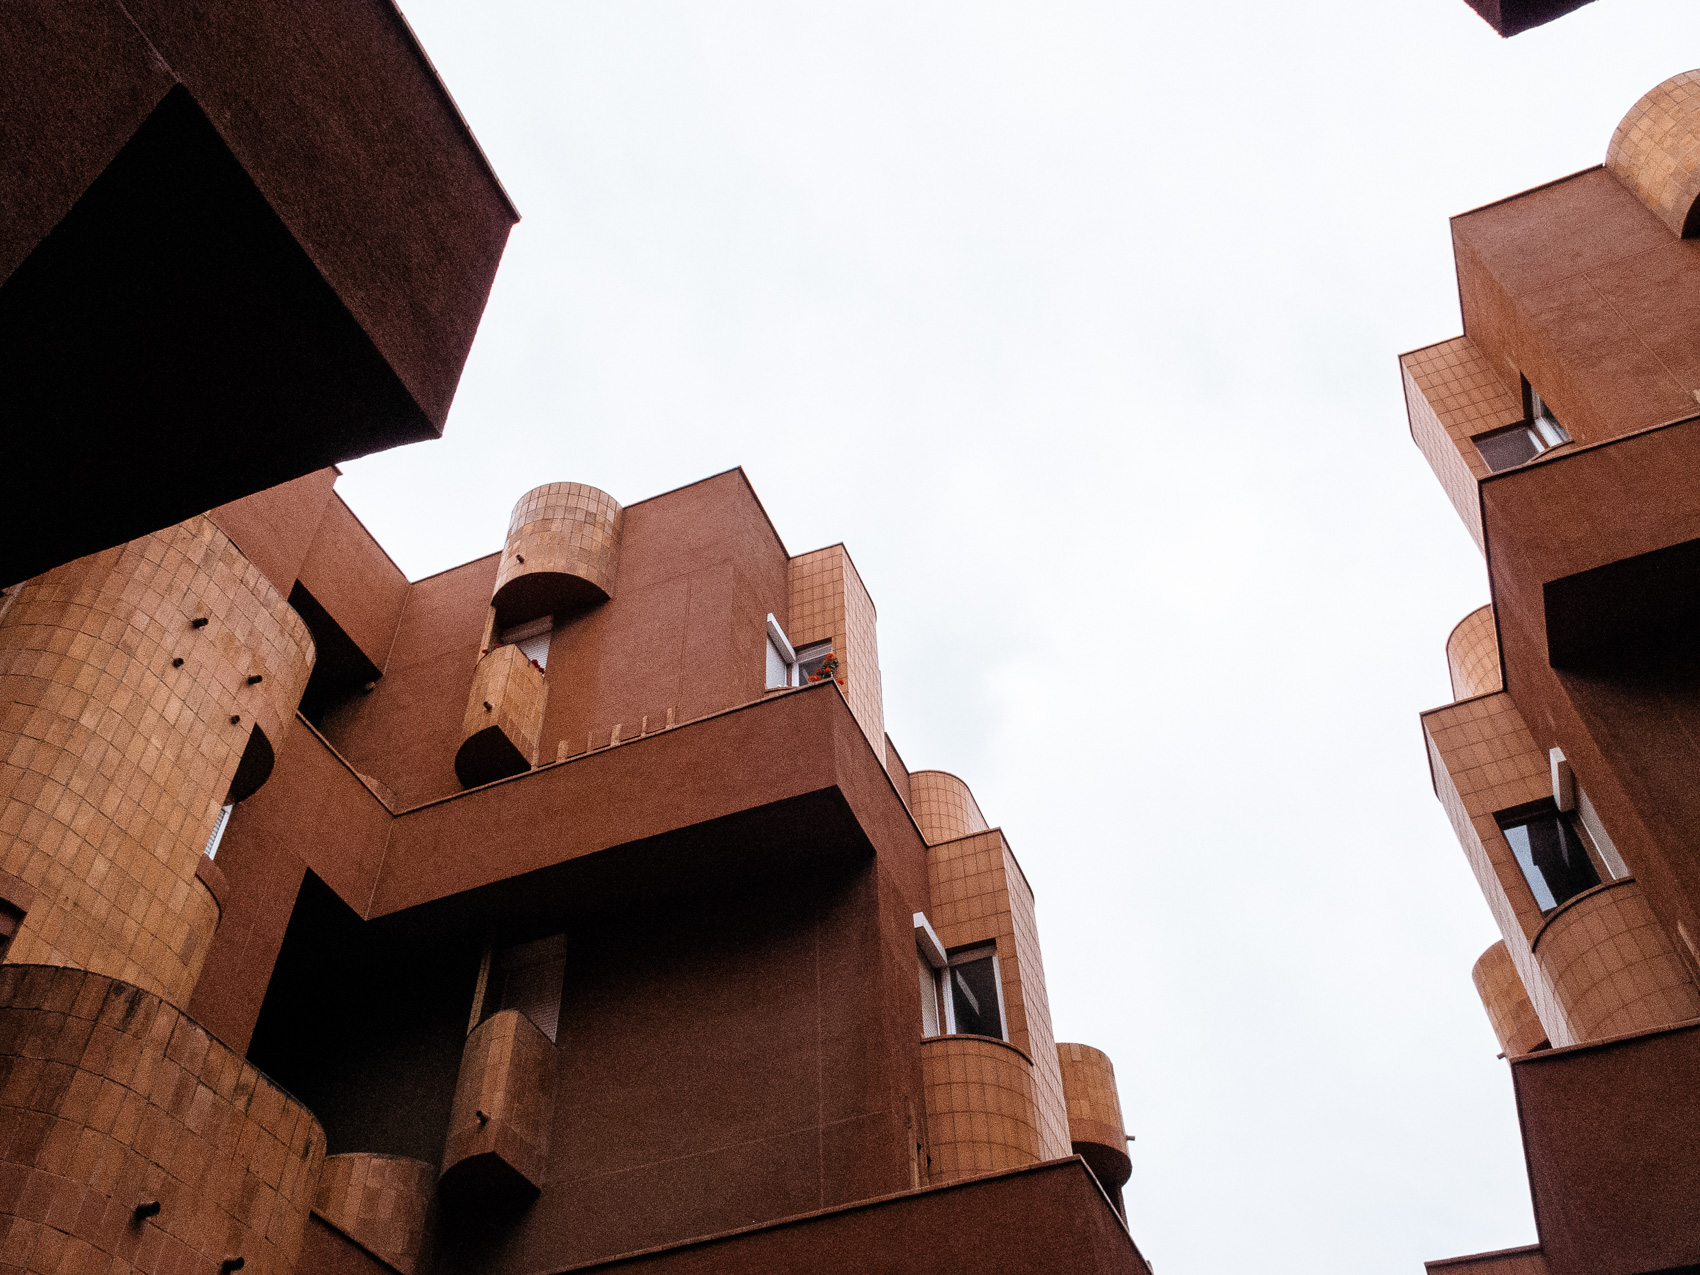 Ricardo Bofill's Walden 7 in the outskirts of Barcelona, Spain